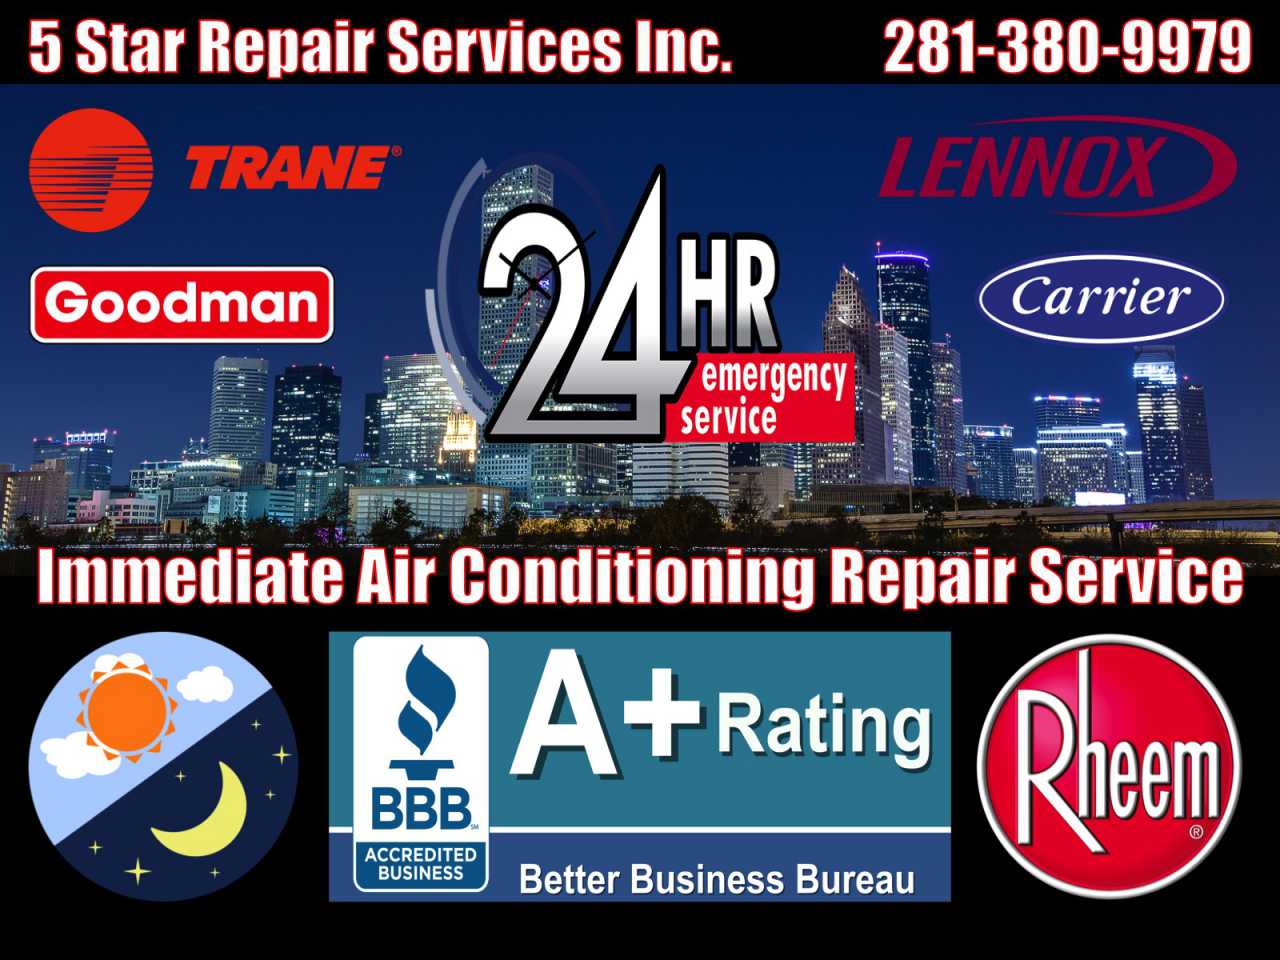 24 Hour Emergency Air Conditioning AC HVAC Furnace Condition Repair Service River Oaks Houston 77019 77098 77006 77004 770027 Central Cooling Unit System Duct Cleaning Maintenance